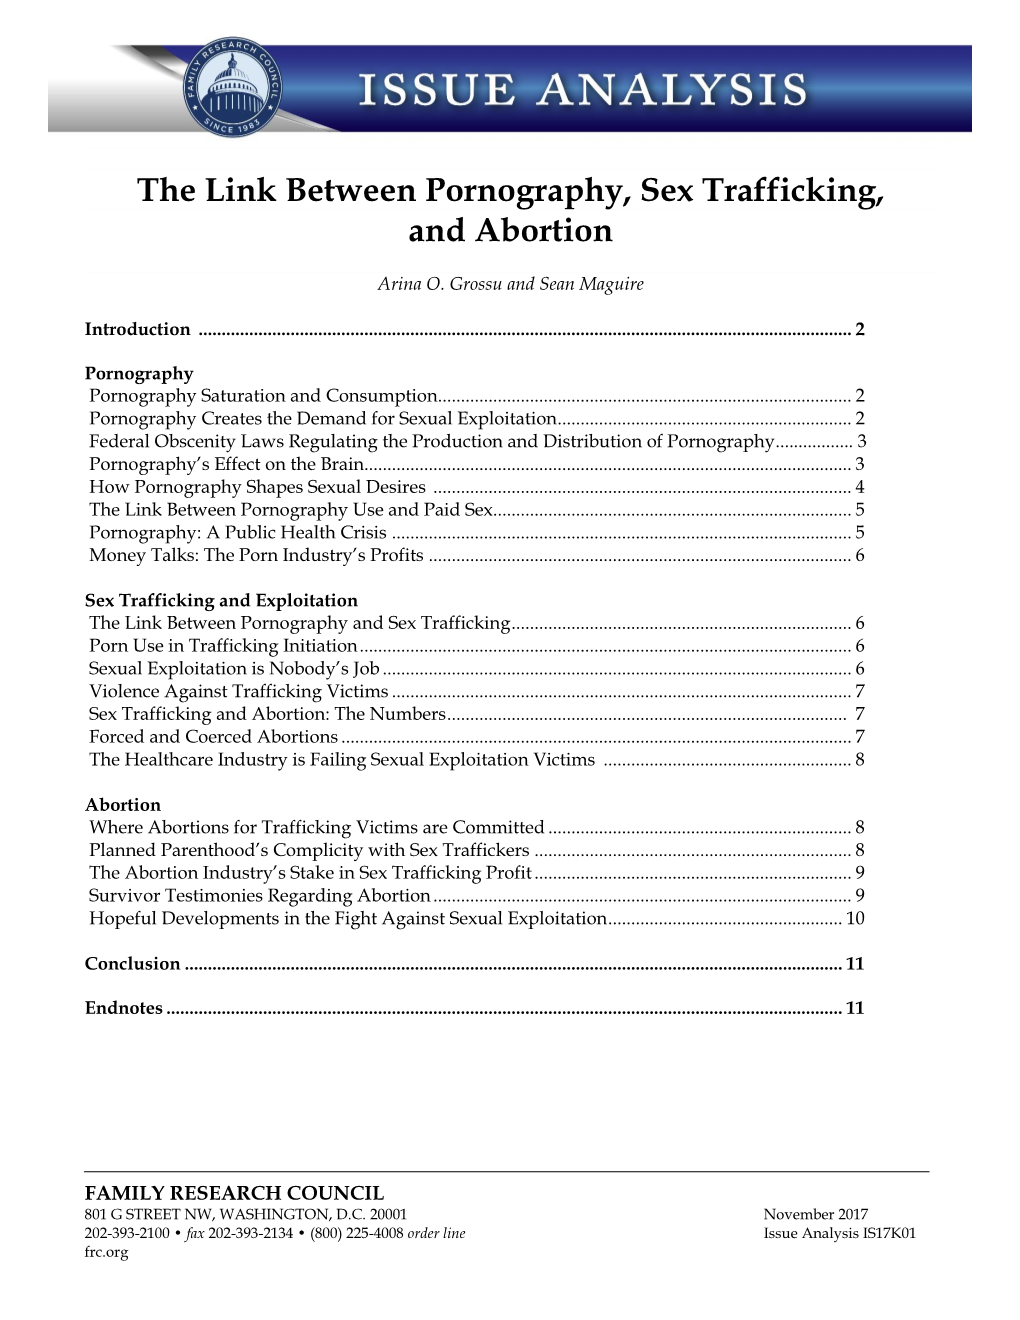 The Link Between Pornography, Sex Trafficking, and Abortion